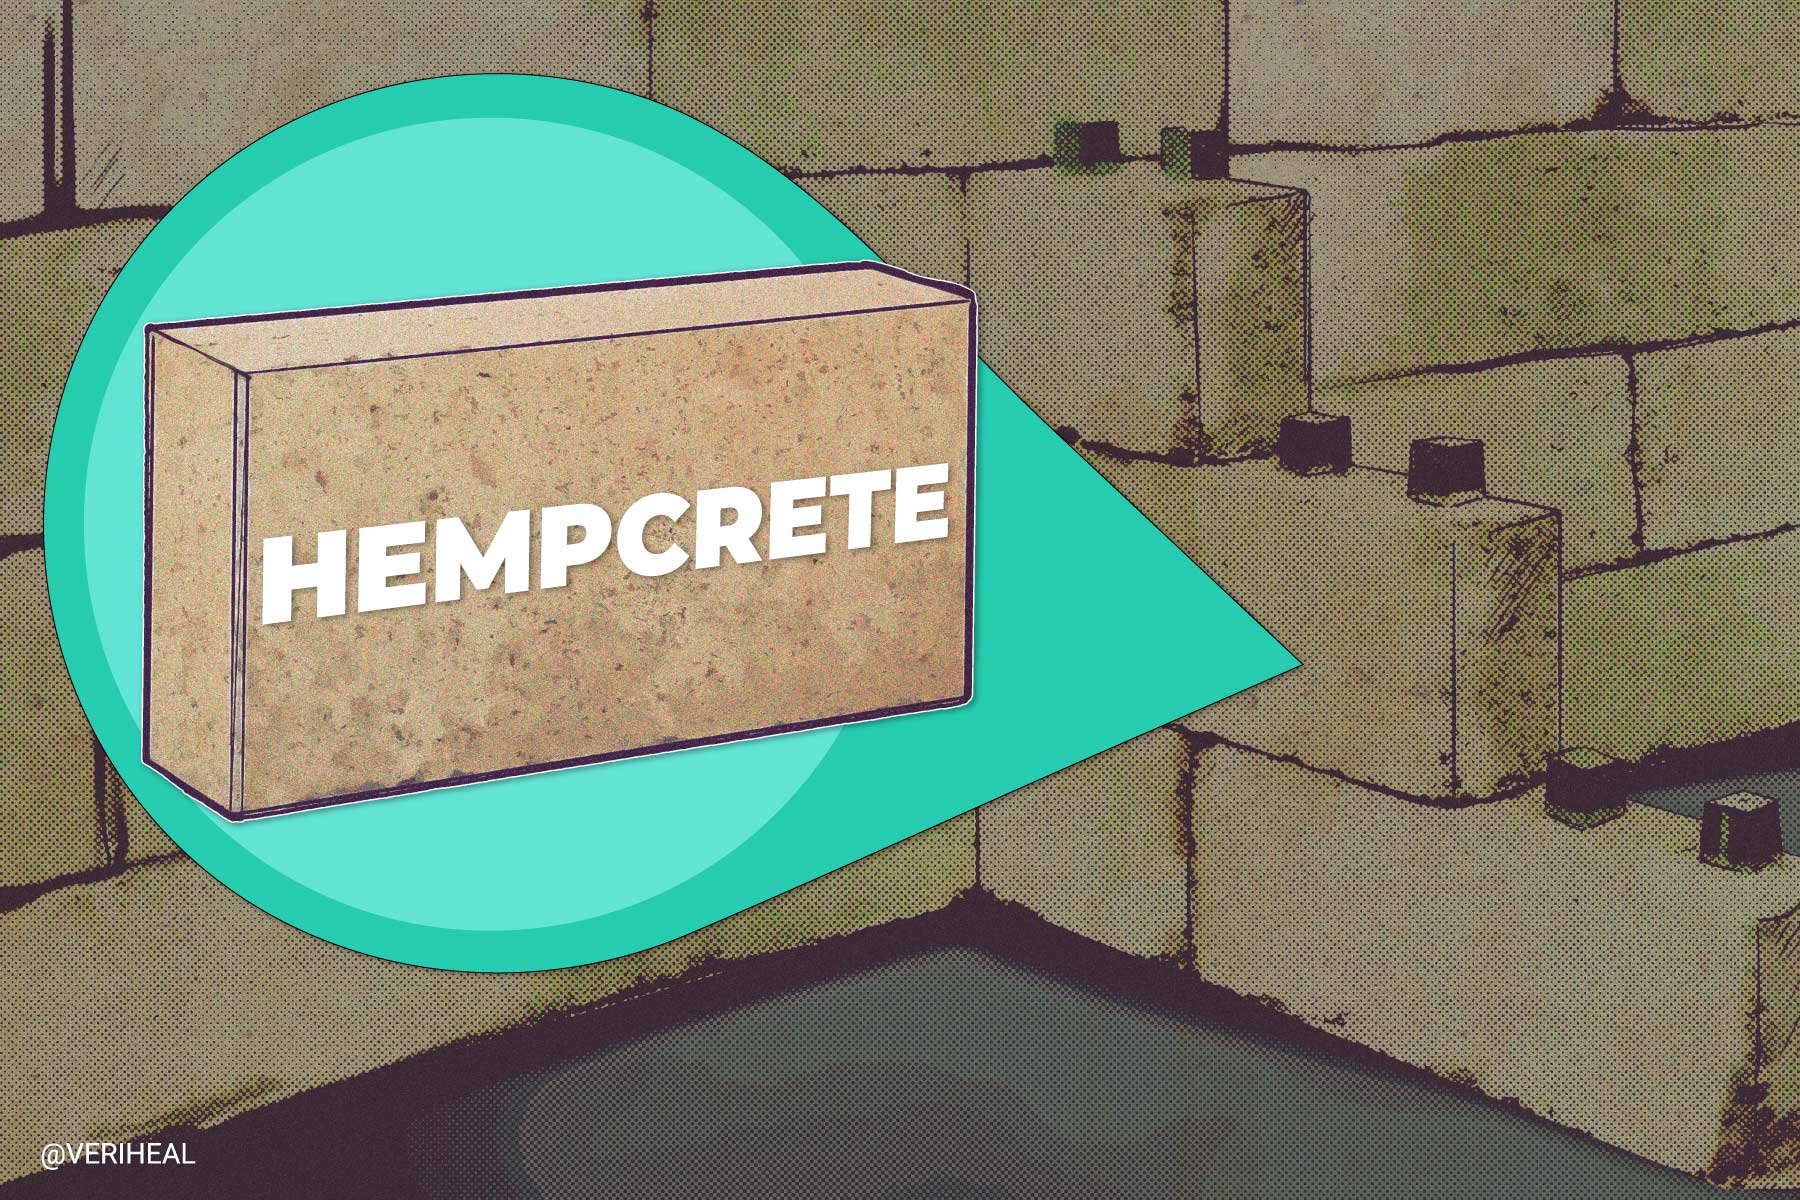 Hempcrete Insulation Paving the Path to Cleaner, Greener, Residential and Commercial Building Materials